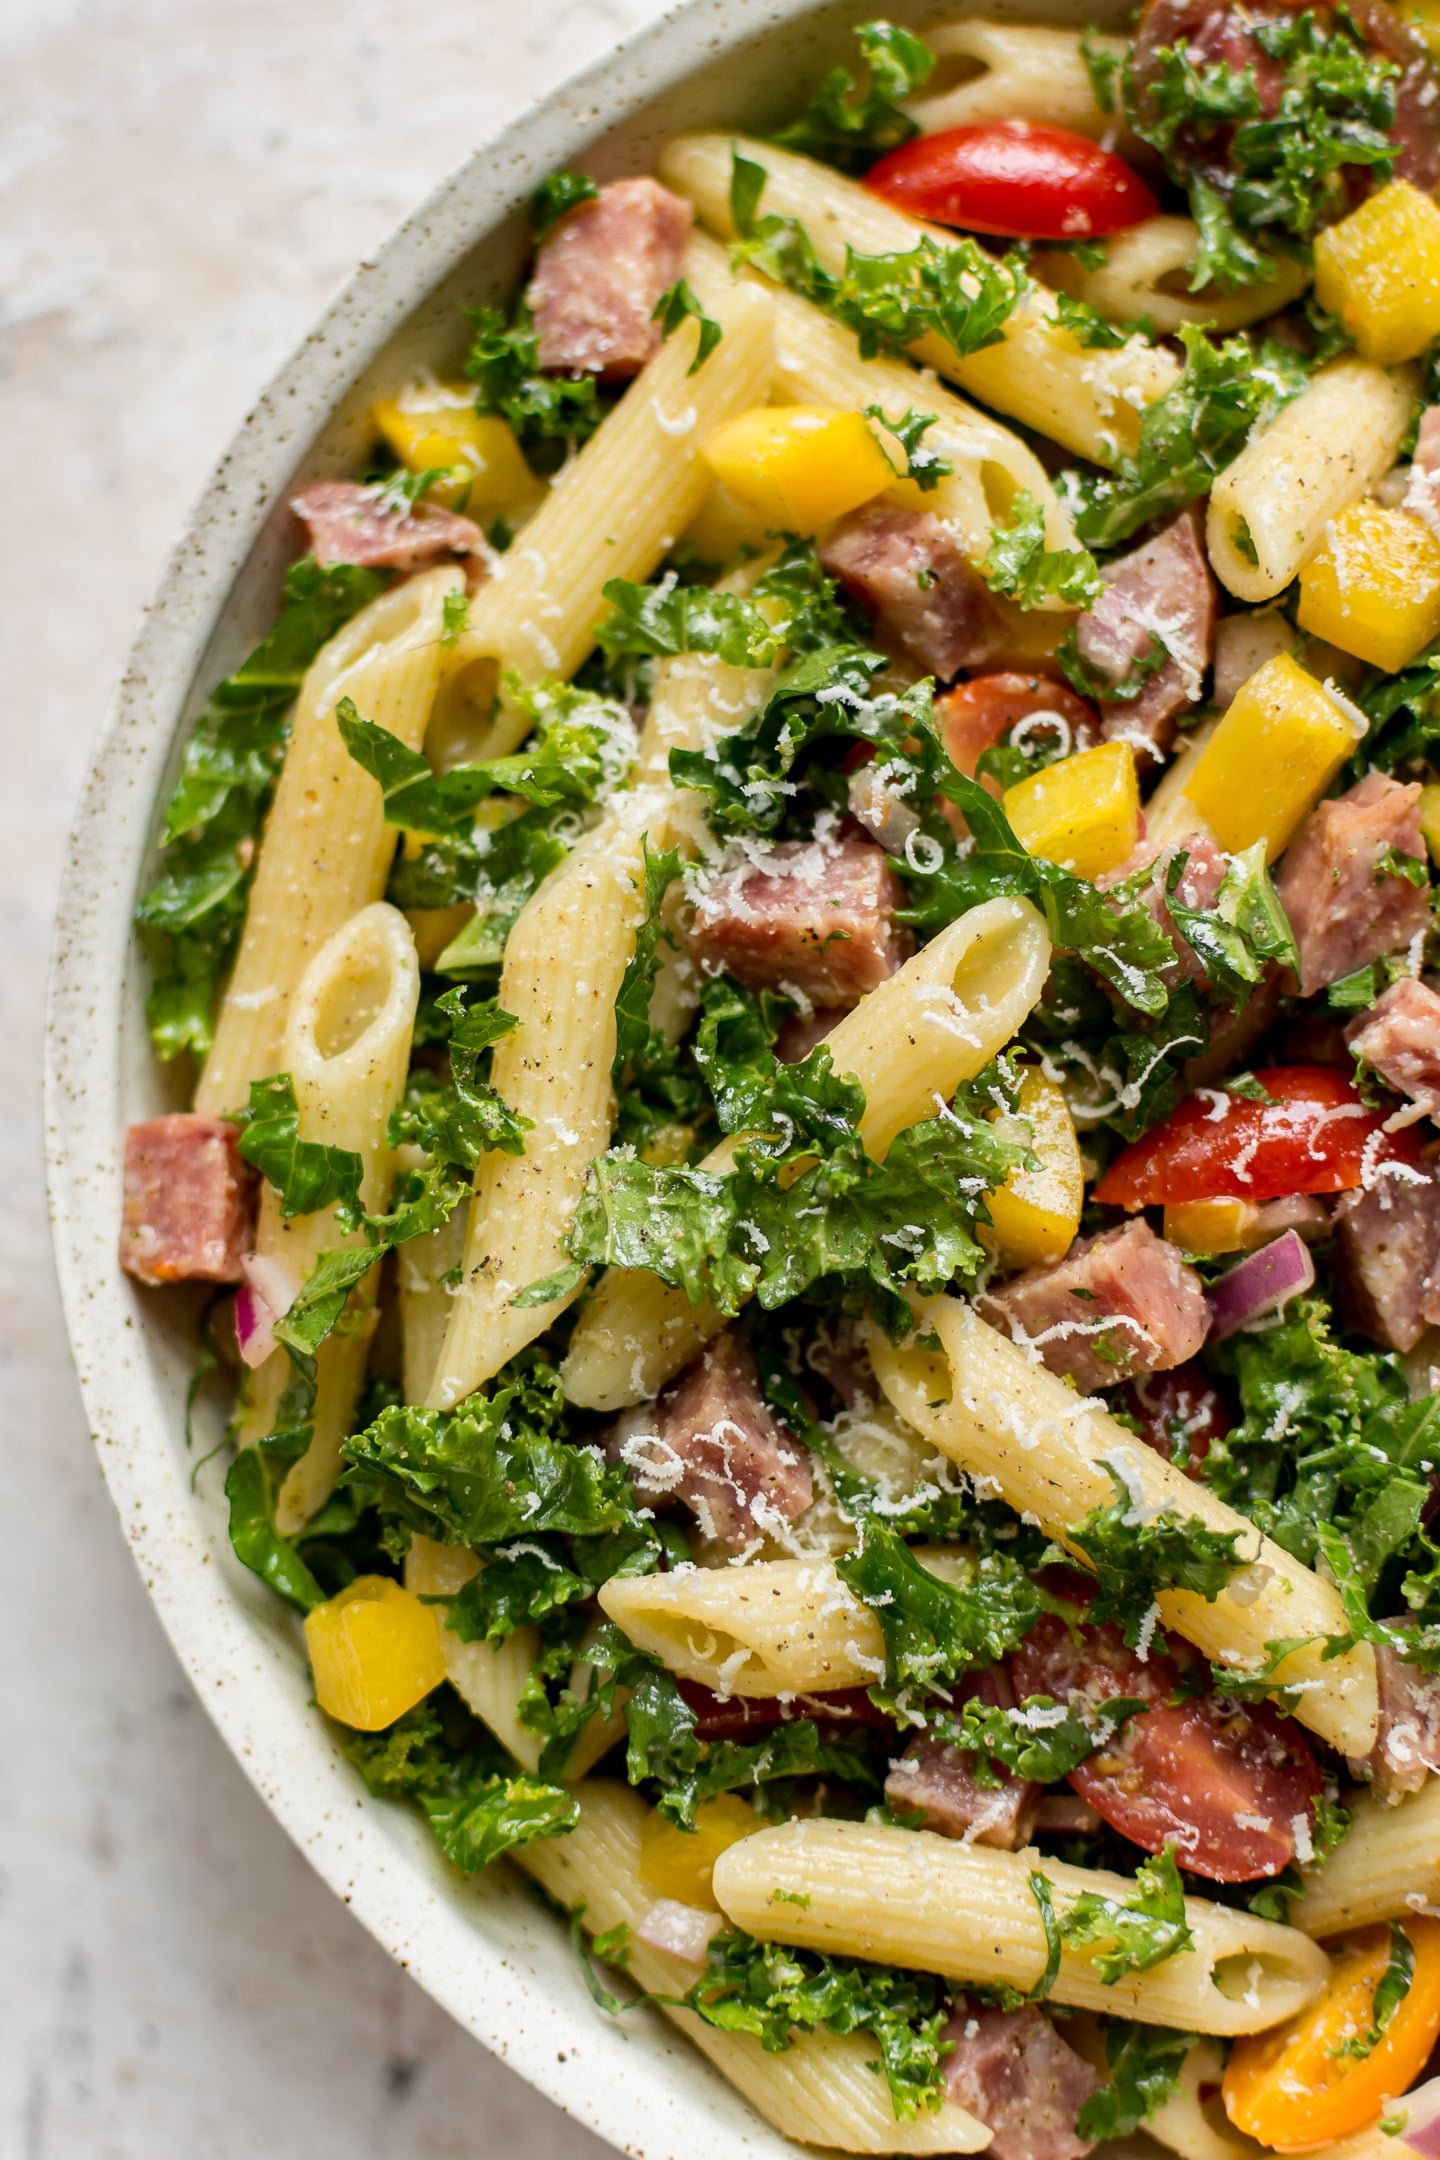 Elevate Your Pasta Game with These Delicious Kale Recipes